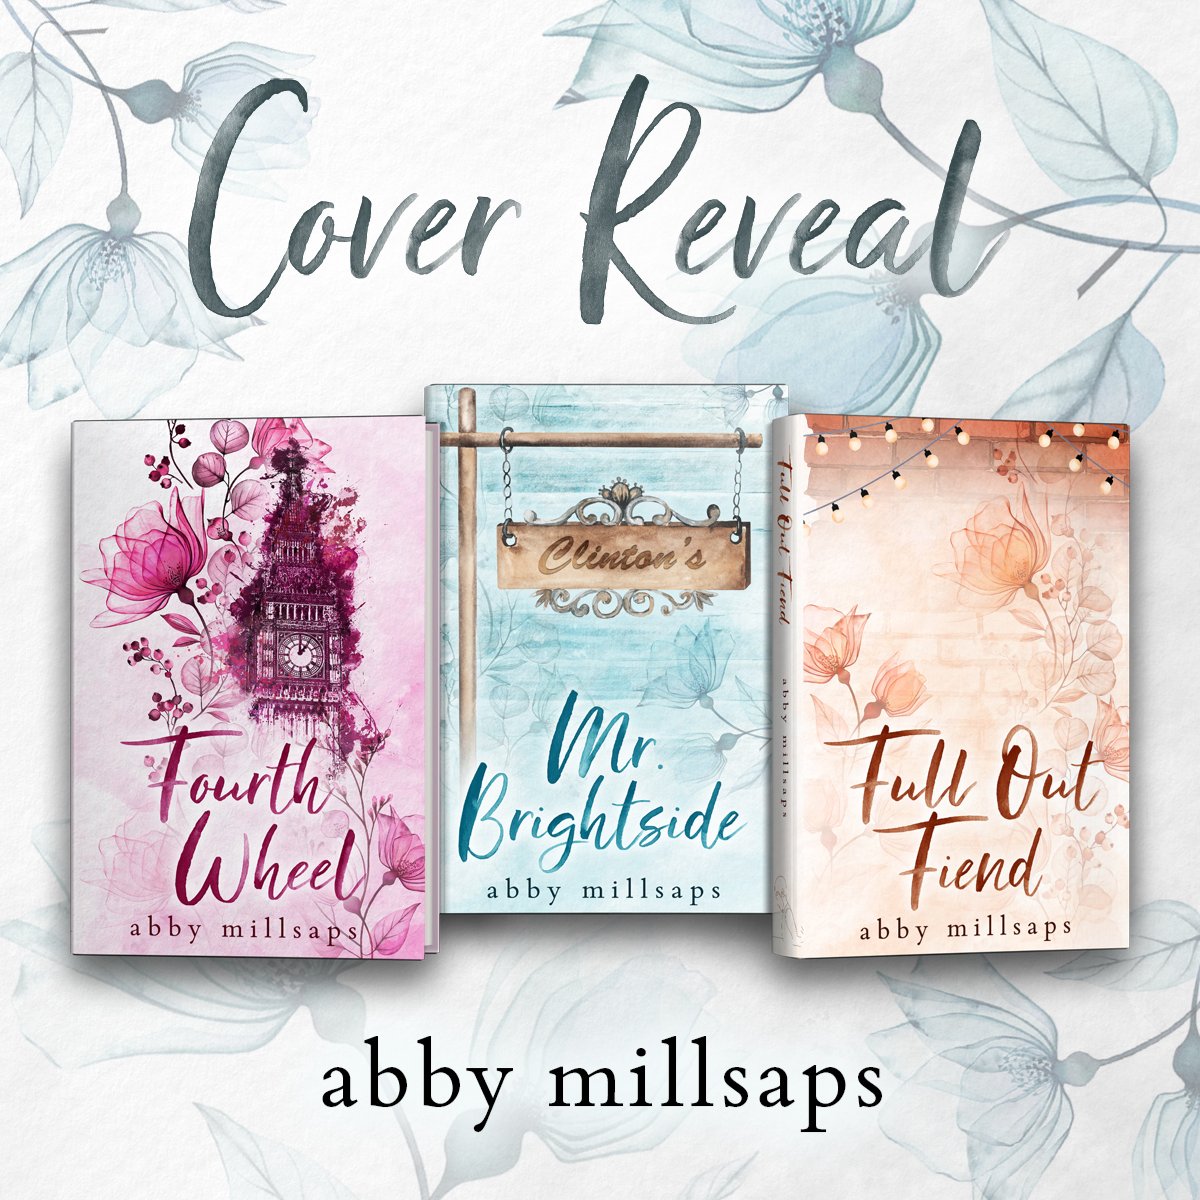 Author @AbbyMillsaps has revealed the new covers for Mr. Brightside, Fourth Wheel, and Full Out Fiend! Download today or read for FREE with Kindle Unlimited! Mr. Brightside: amzn.to/4bE2qgX Fourth Wheel: amzn.to/49p1GdK Full Out Fiend: amzn.to/49eK8kE